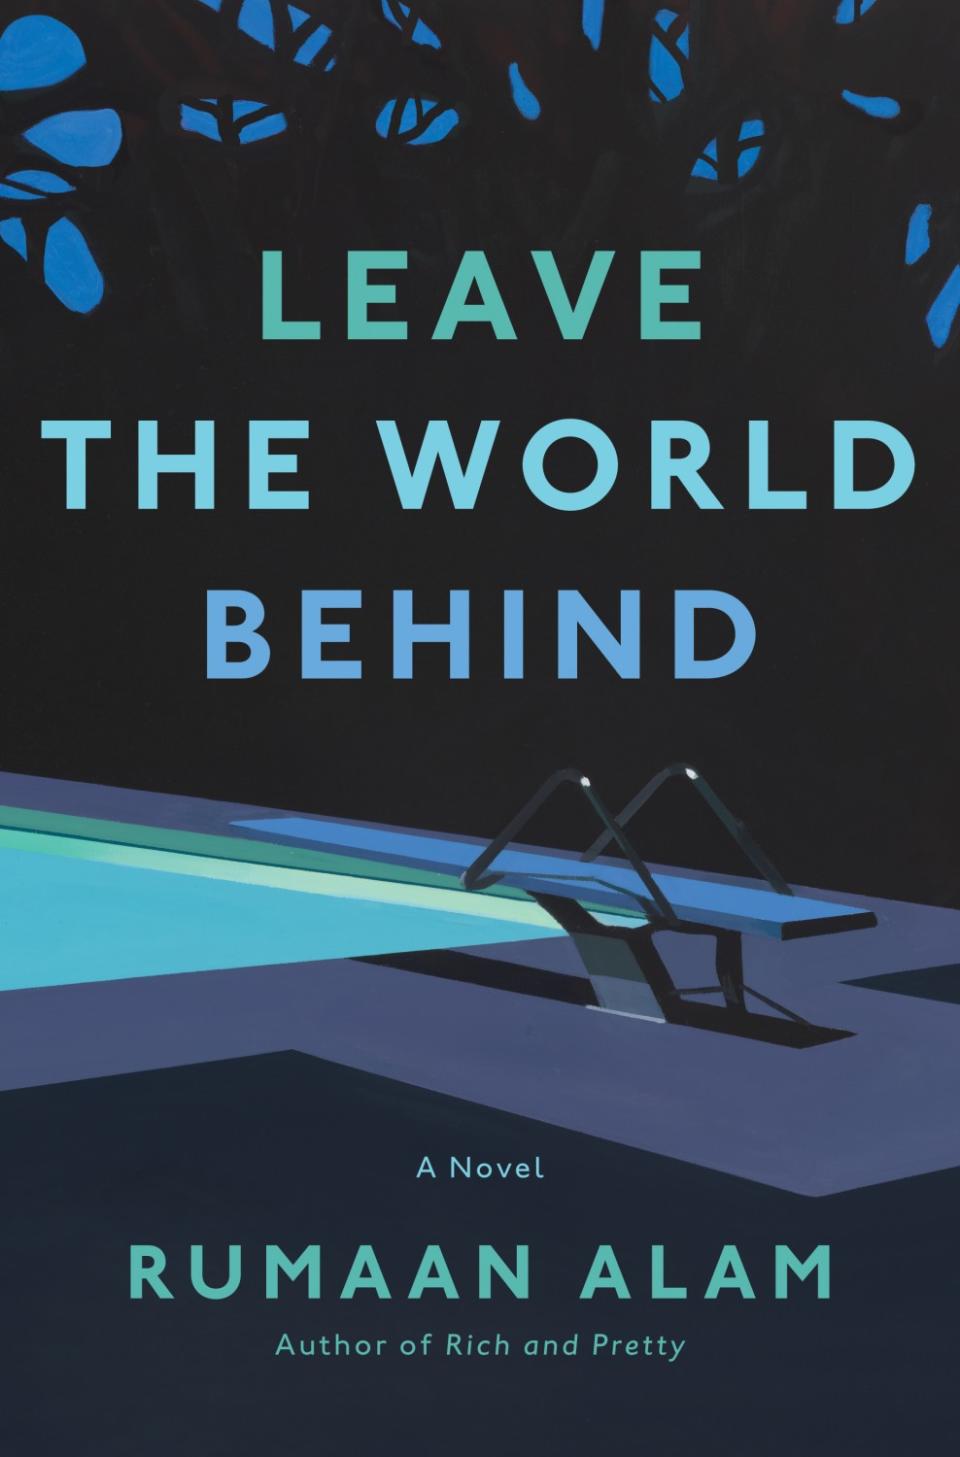 "Leave the World Behind," by Rumaan Alam.